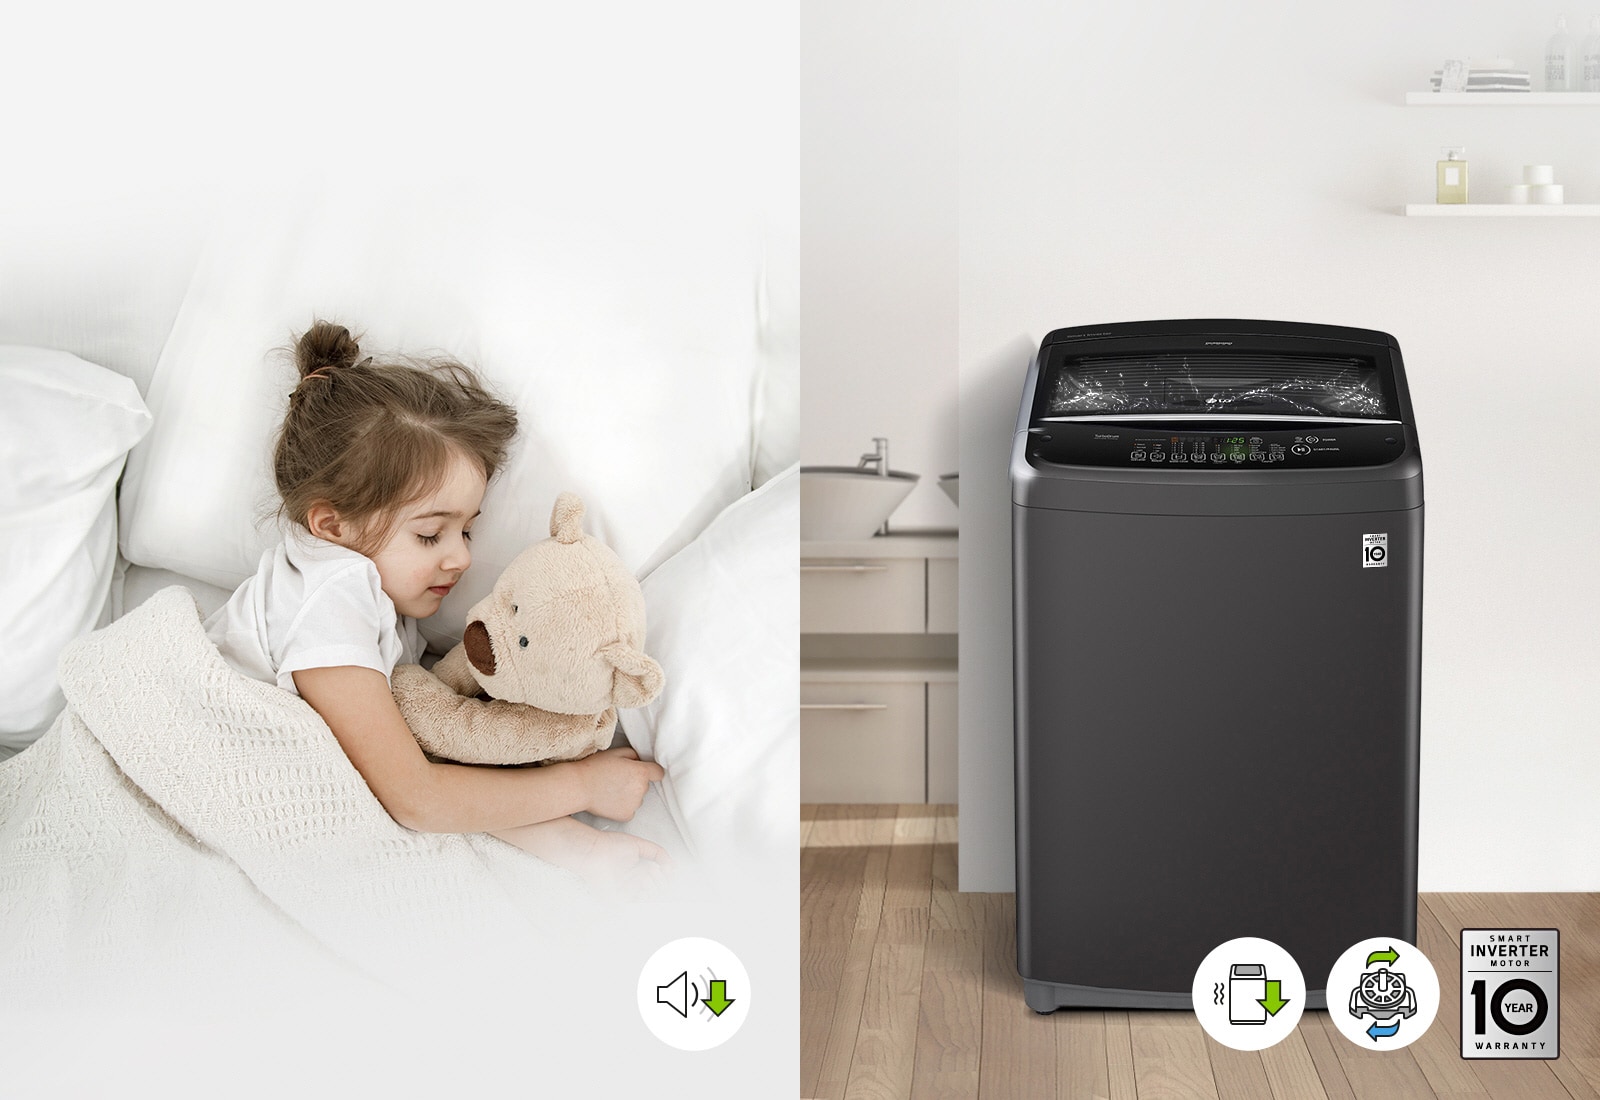 LG T1366NEHV2 A child sleeps with a teddy bear on a bed in an image on the left with a volume icon next to an arrow down to indicate it is quiet. The front of the Top Load Washing Machine is shown on the right with three icons beneath it. The first icon is a washer and squiggly lines to mean shaking and an arrow pointing down. The second icon is a motor with a green arrow above pointing right and a blue arrow below pointing left to show rotation. The third icon is the LG Smart Inverter Motor 10 Year Warranty image. 